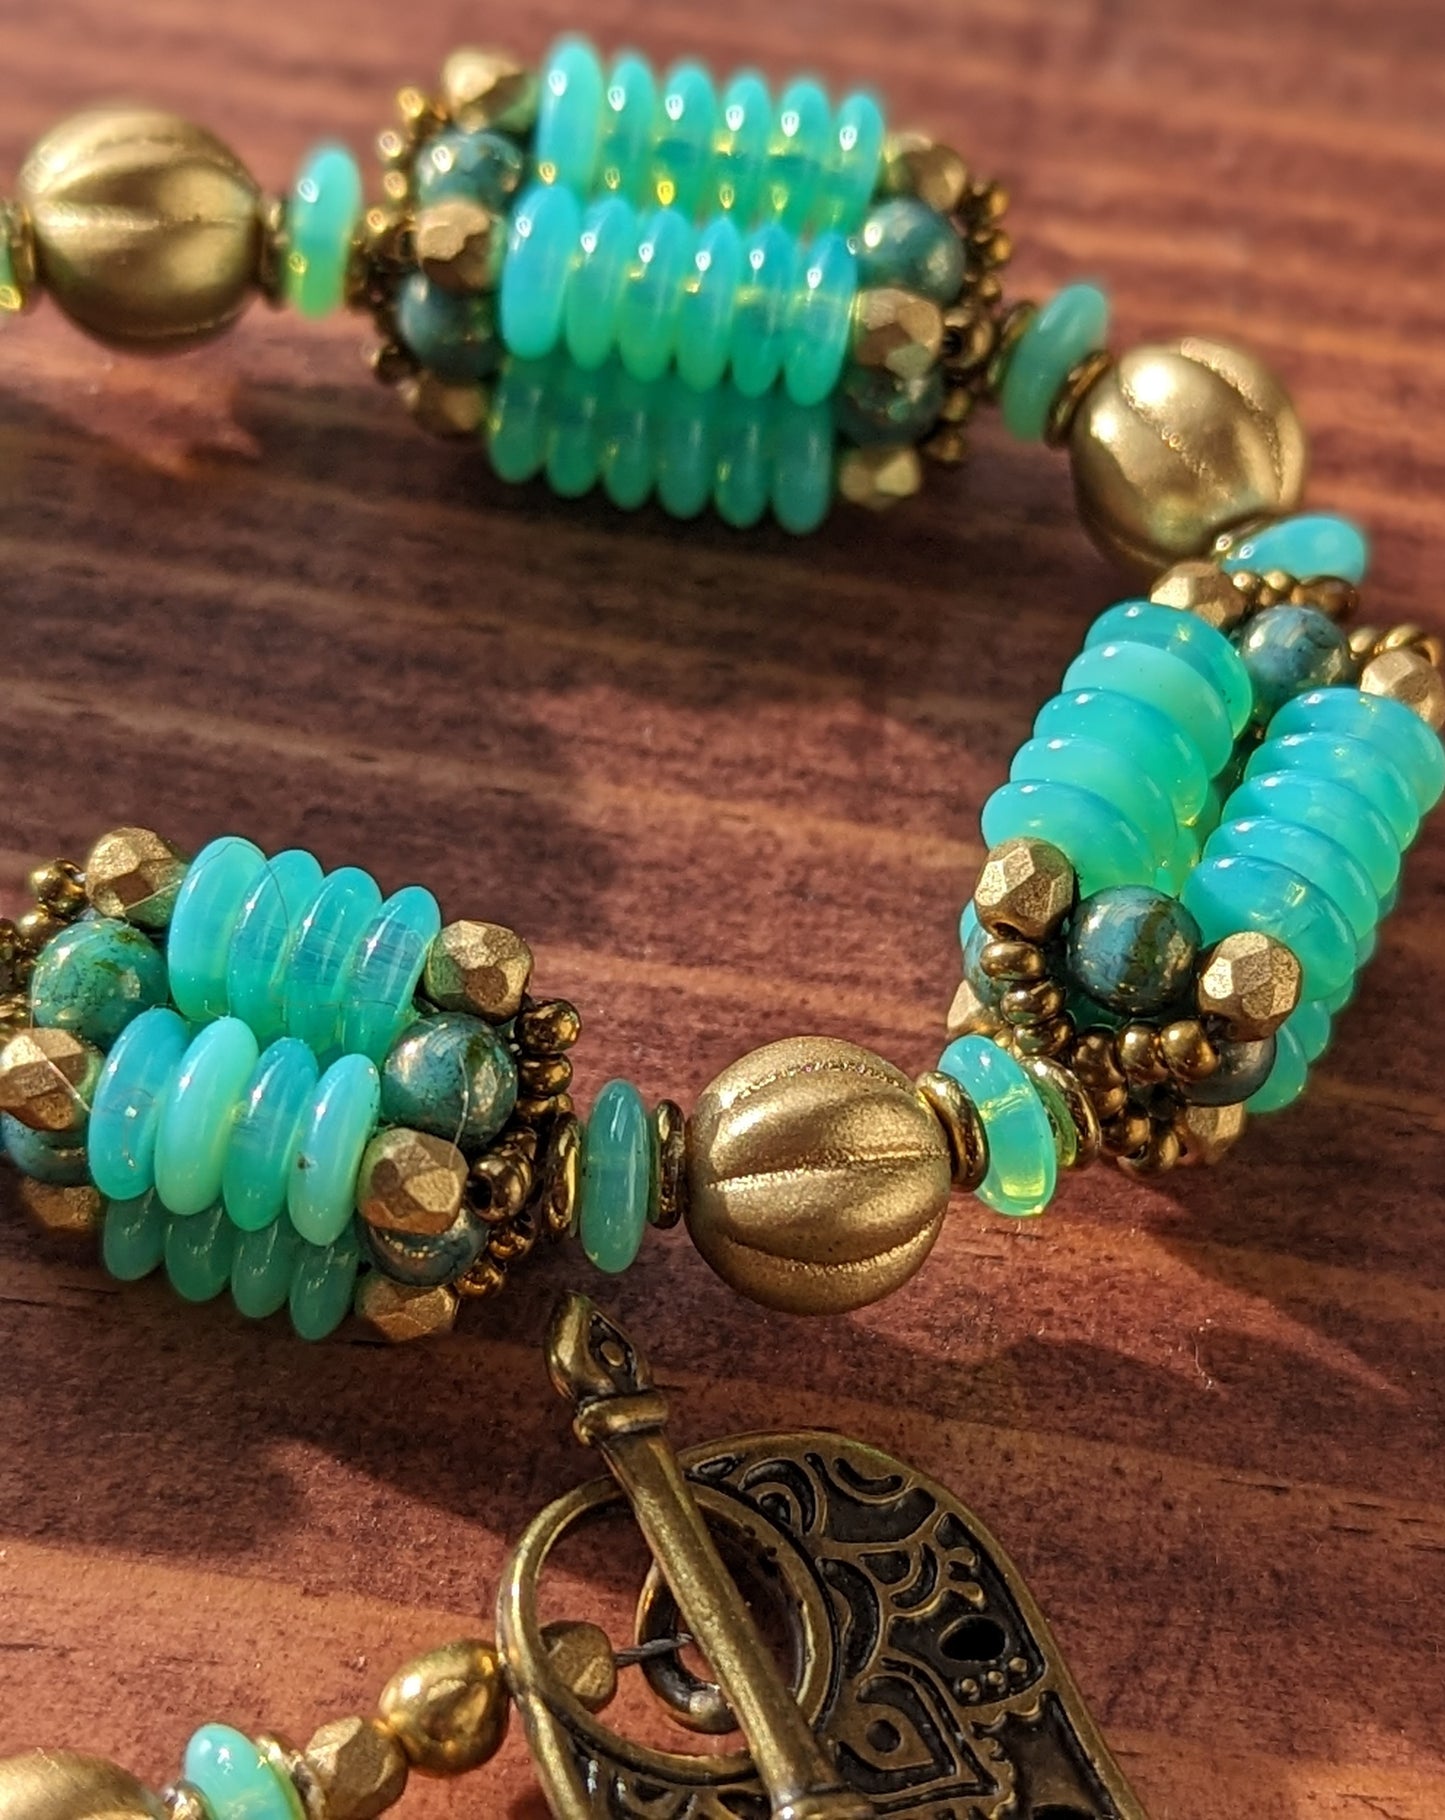 A close up of three beaded beads with columns of light opalescent seafoam Czech glass discs with lustered teal accents. Between each beaded bead is a gold melon bead. At the lower left side there is a delicately patterned teardrop shaped brass toggle clasp.